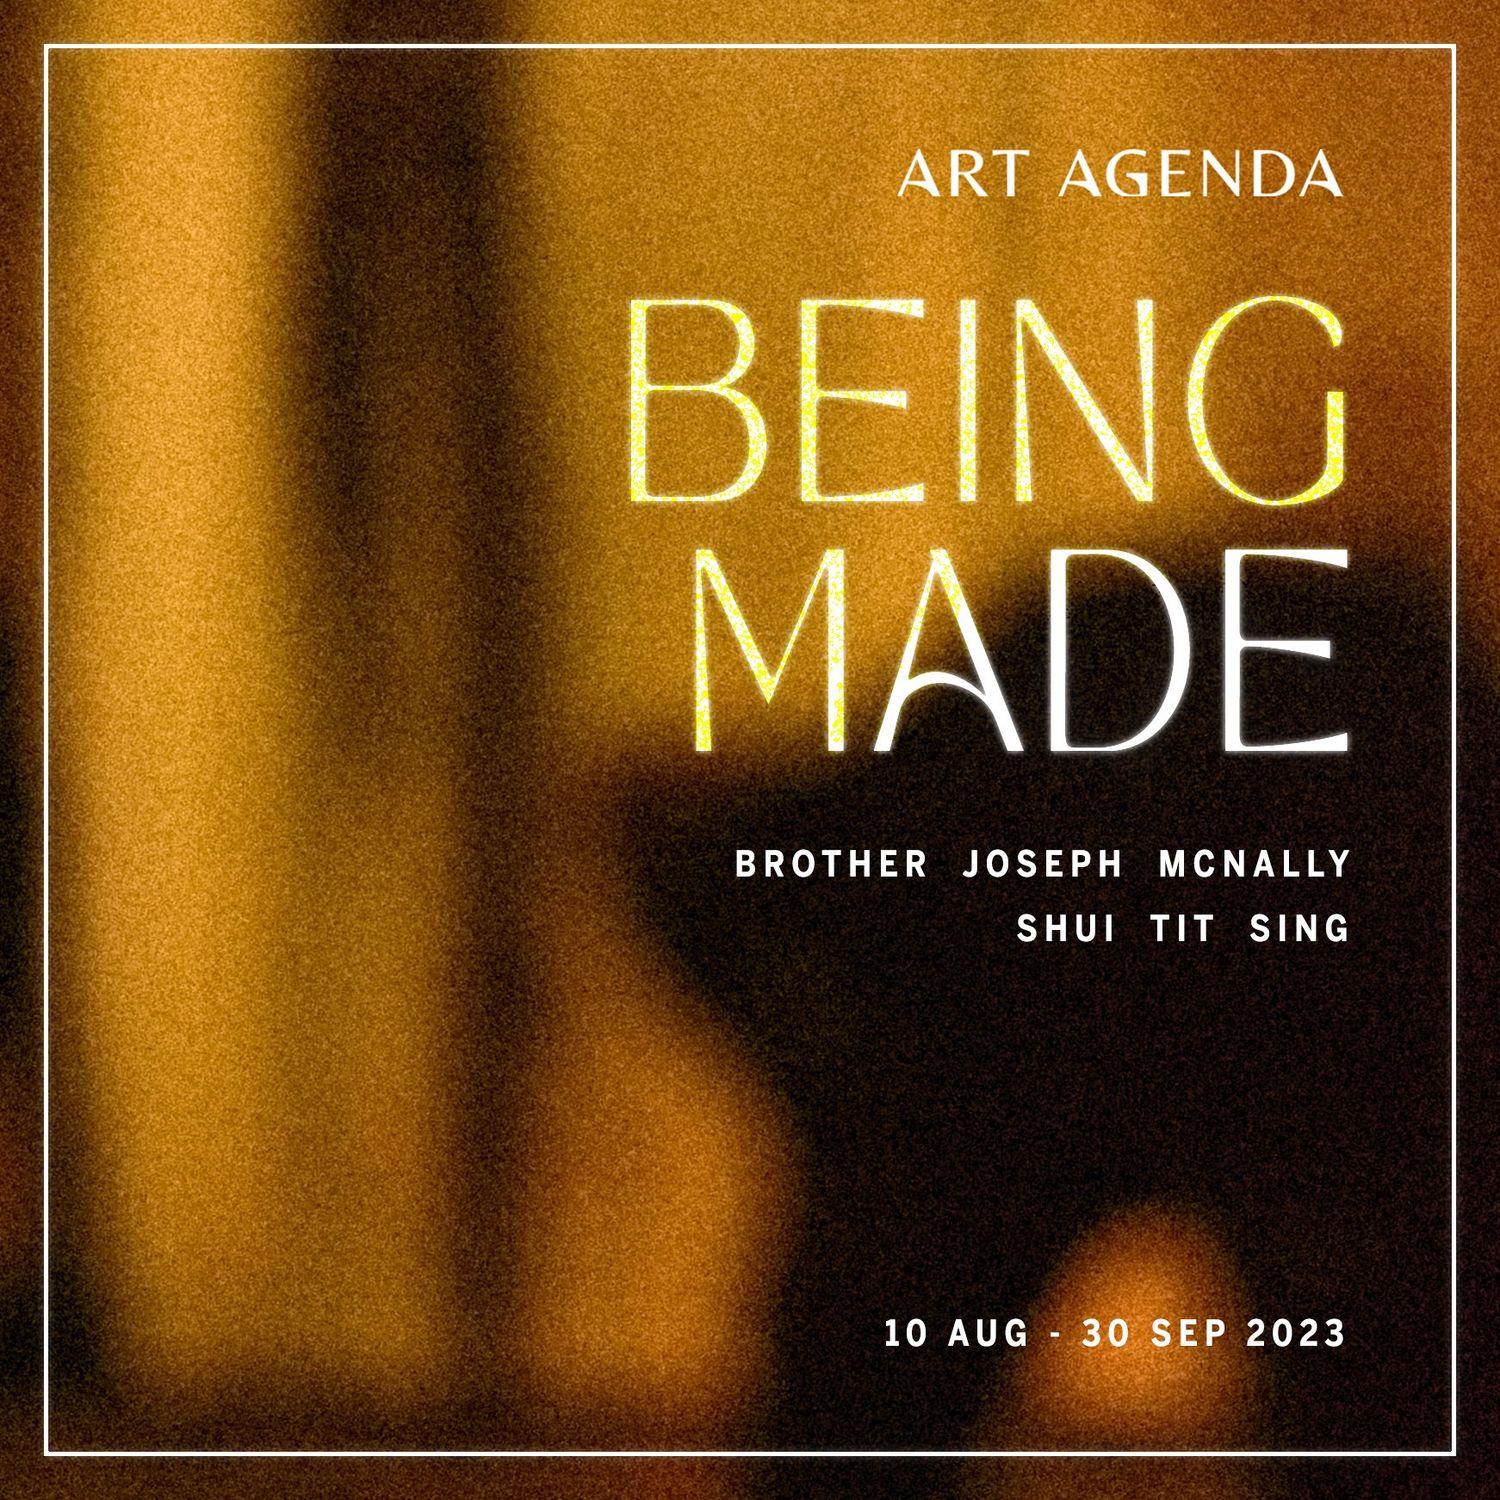 Being Made: Brother Joseph McNally and Shui Tit Sing  | Brother Joseph McNally, Shui Tit Sing | Art Agenda